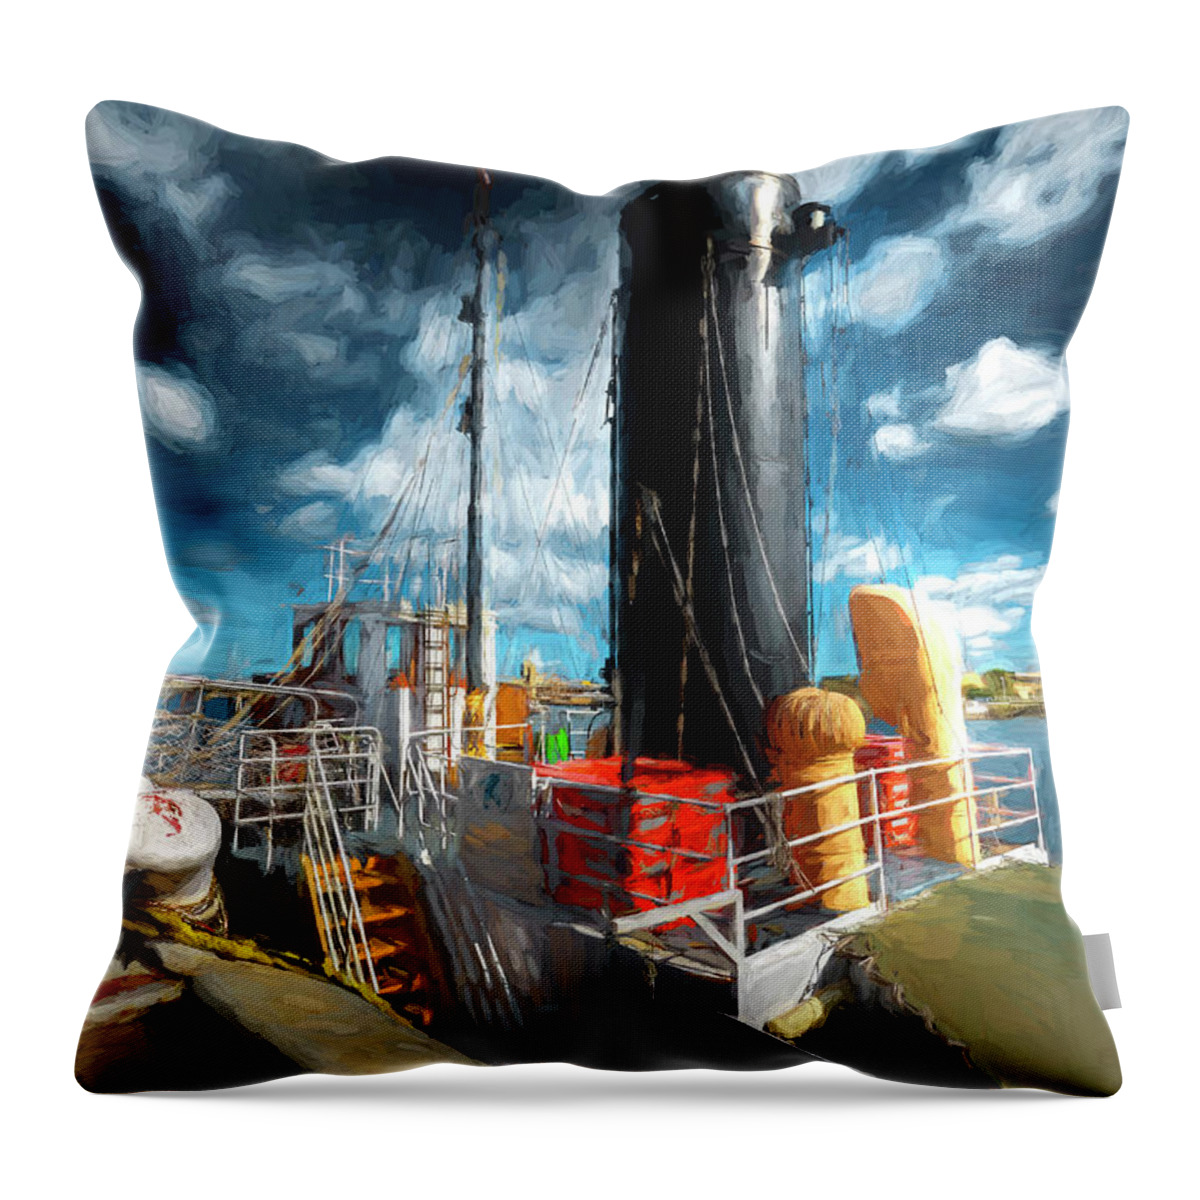 Boat Throw Pillow featuring the digital art Steam Driven by Wayne Sherriff